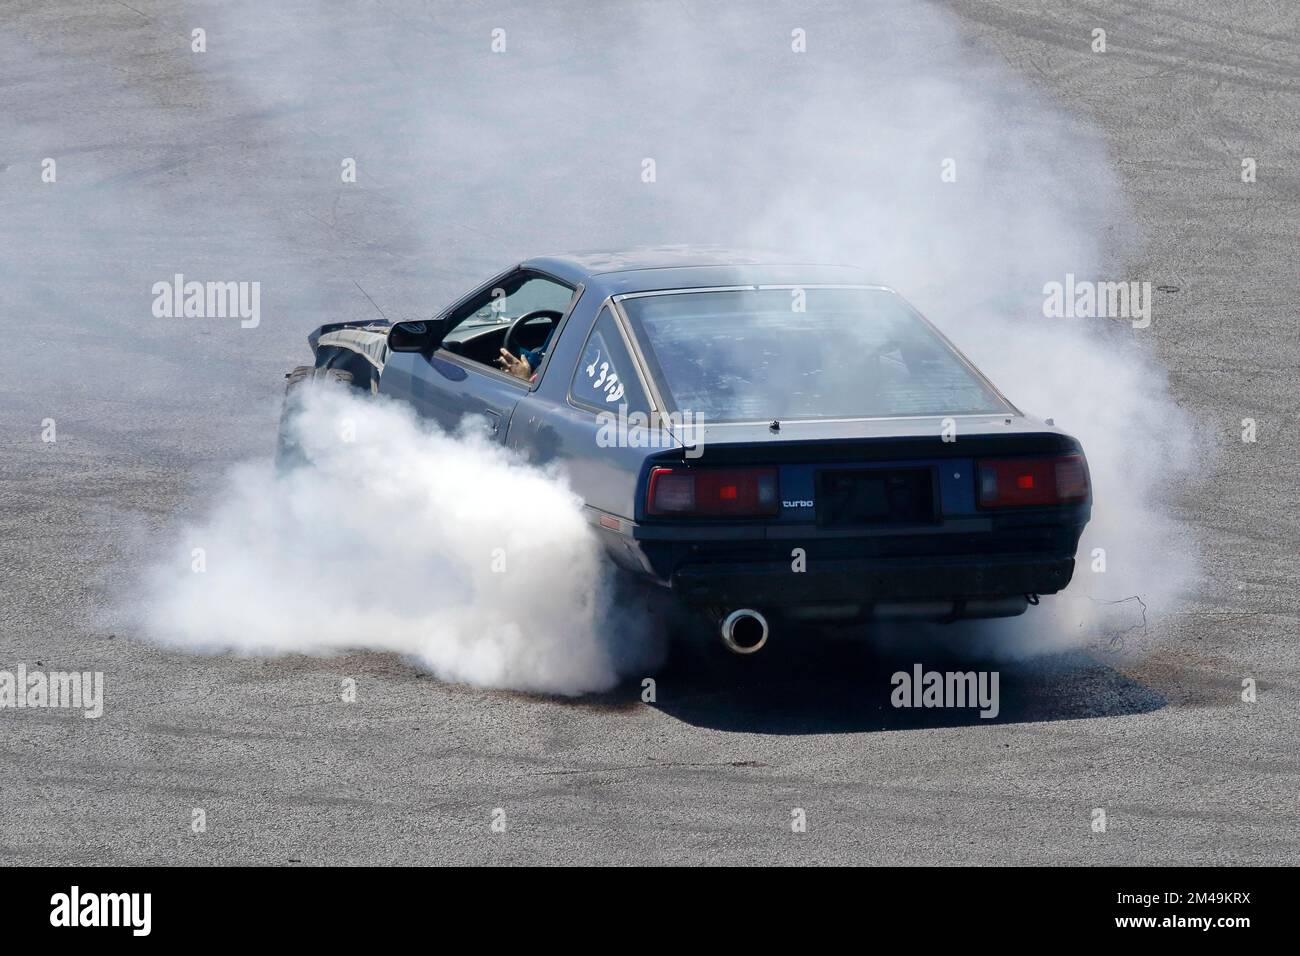 Car performing a skid test, Napierville, Province of Quebec, Canada Stock Photo